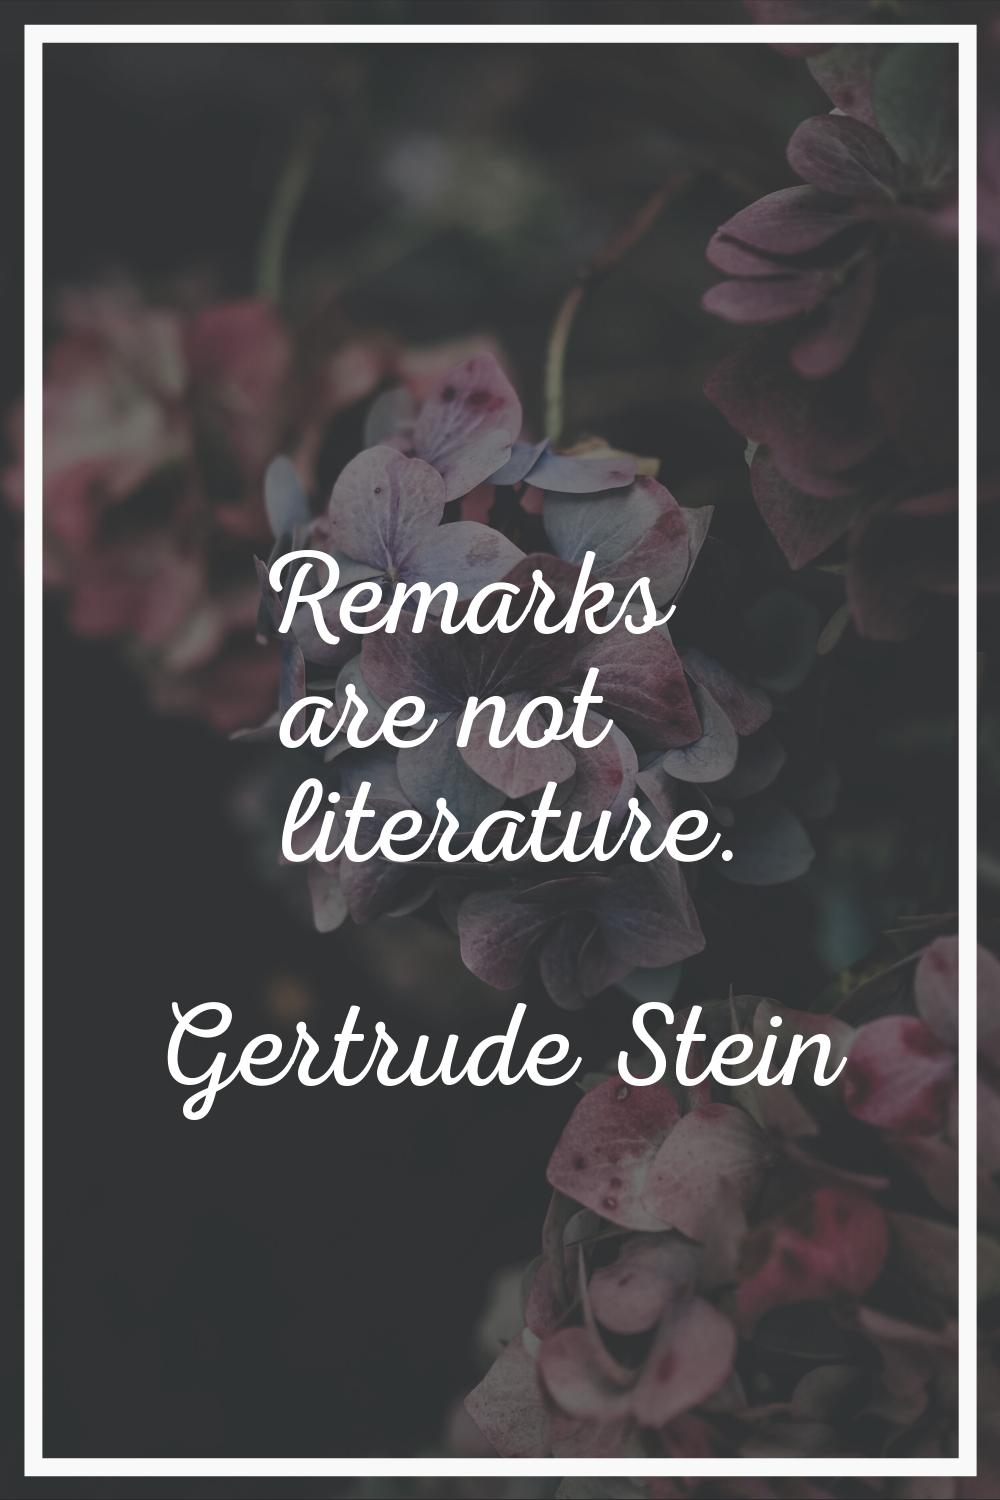 Remarks are not literature.